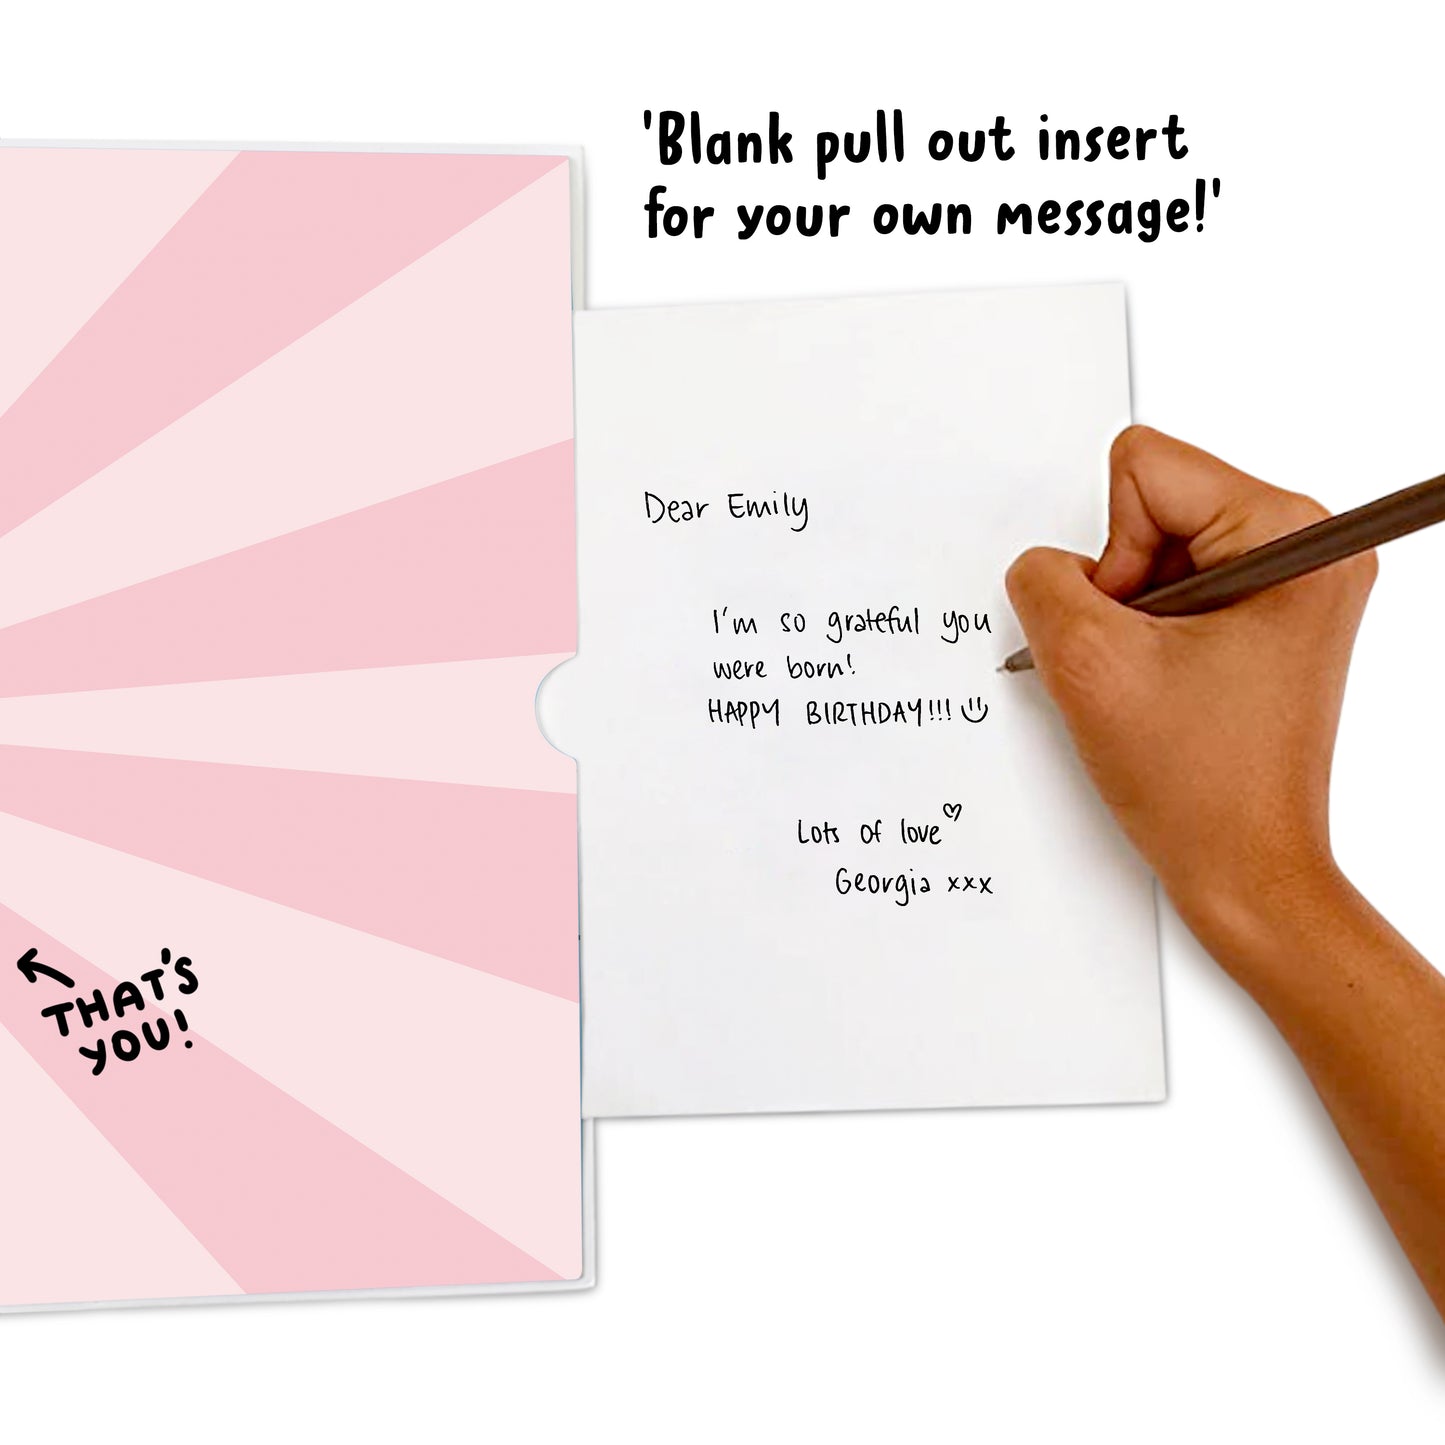 Funny Cute Pop Up Card - You Are My Human Bean - For Men Women Him Her